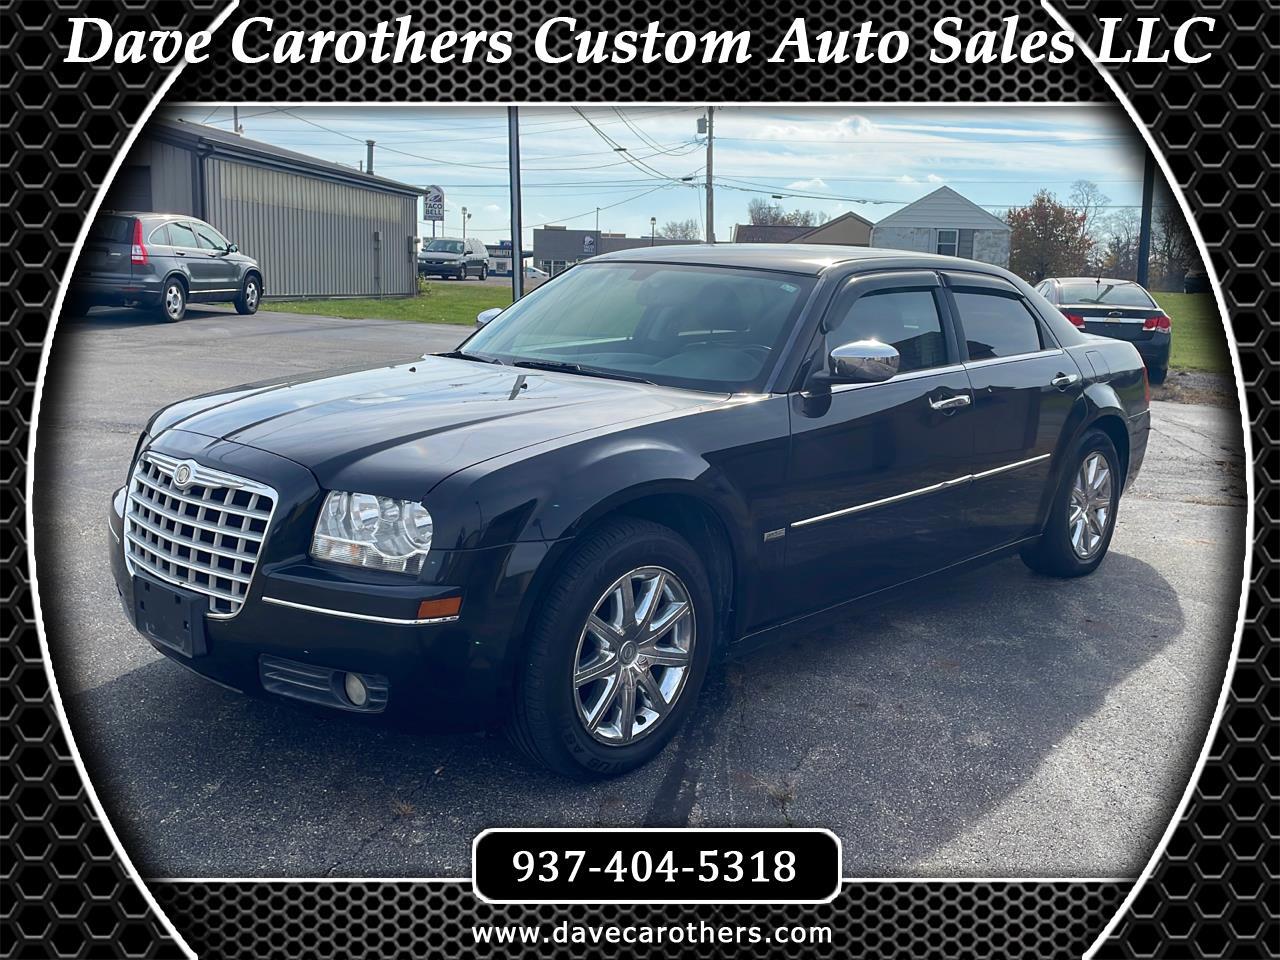 2010 Chrysler 300 4dr Sdn Touring Signature RWD